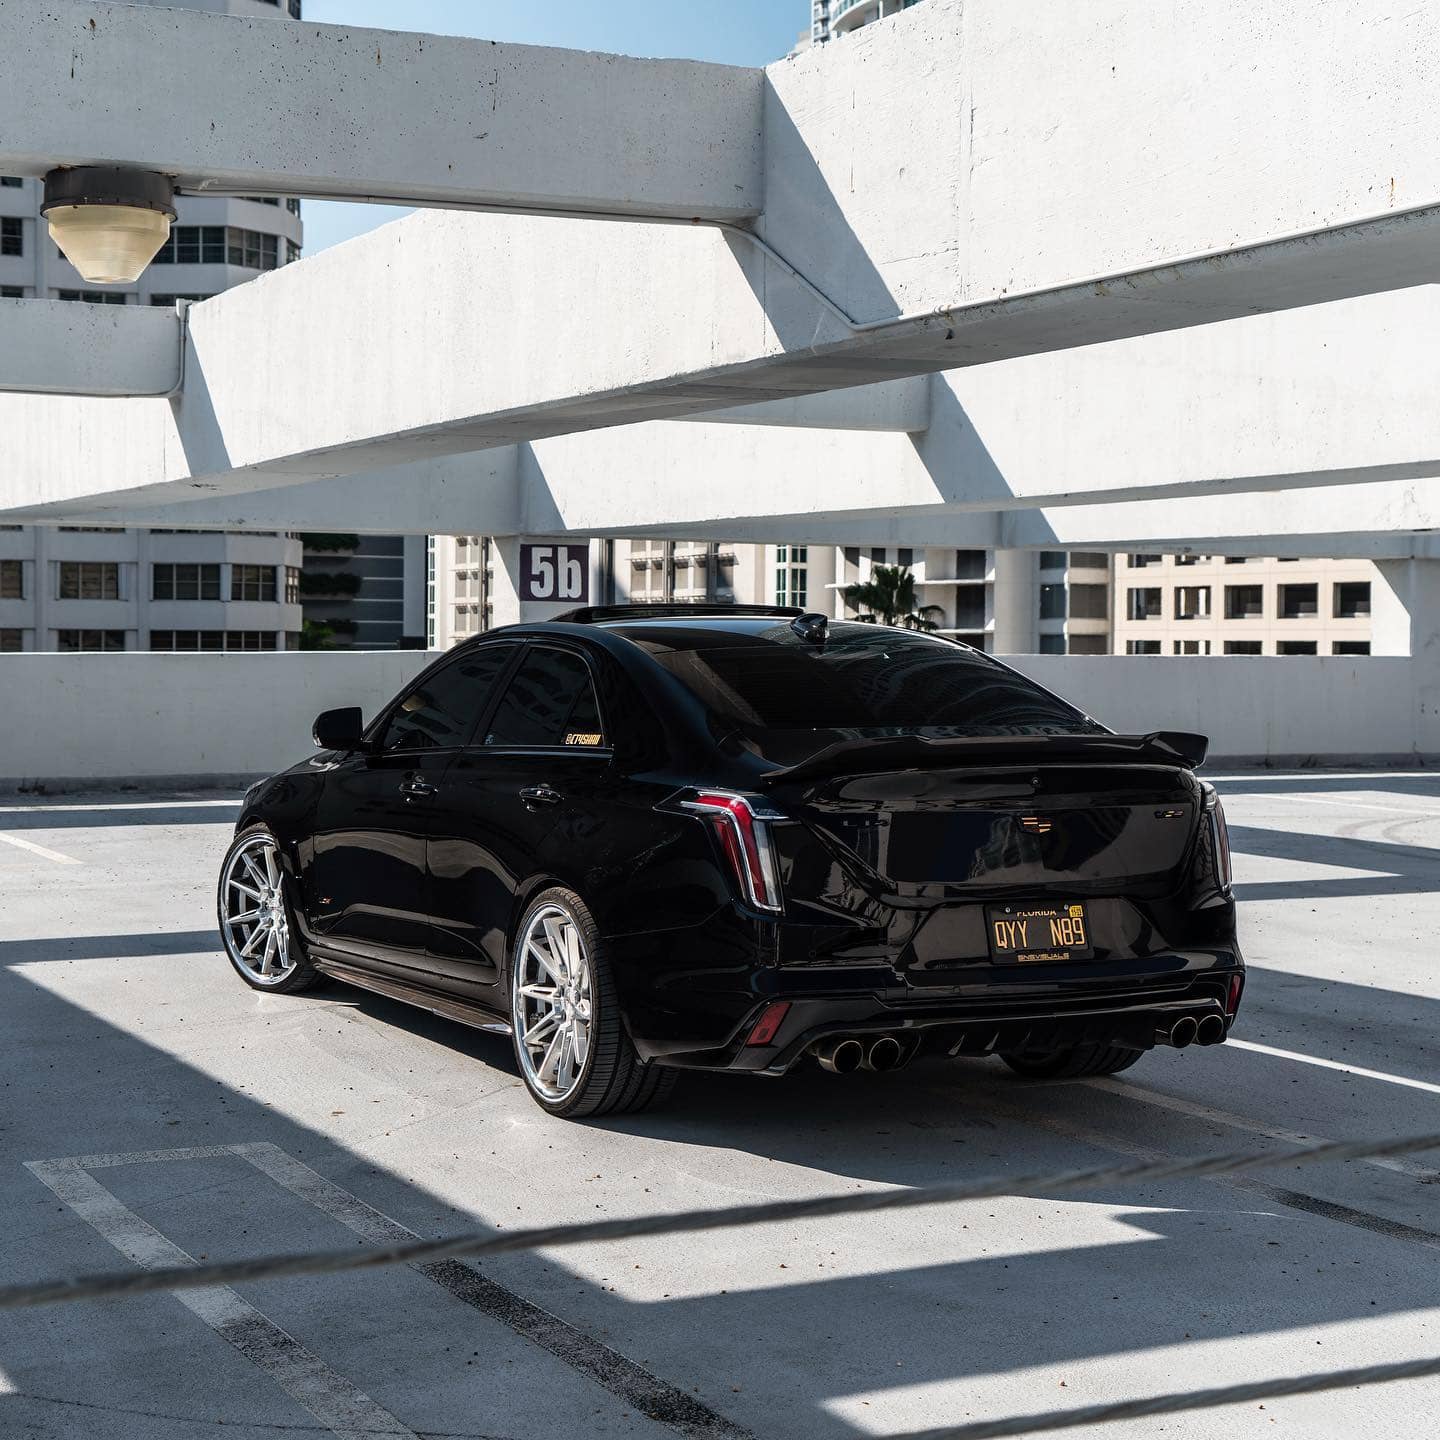 Blacked out Cadillac CT4-V blackwing with custom rear spoiler and diffuser